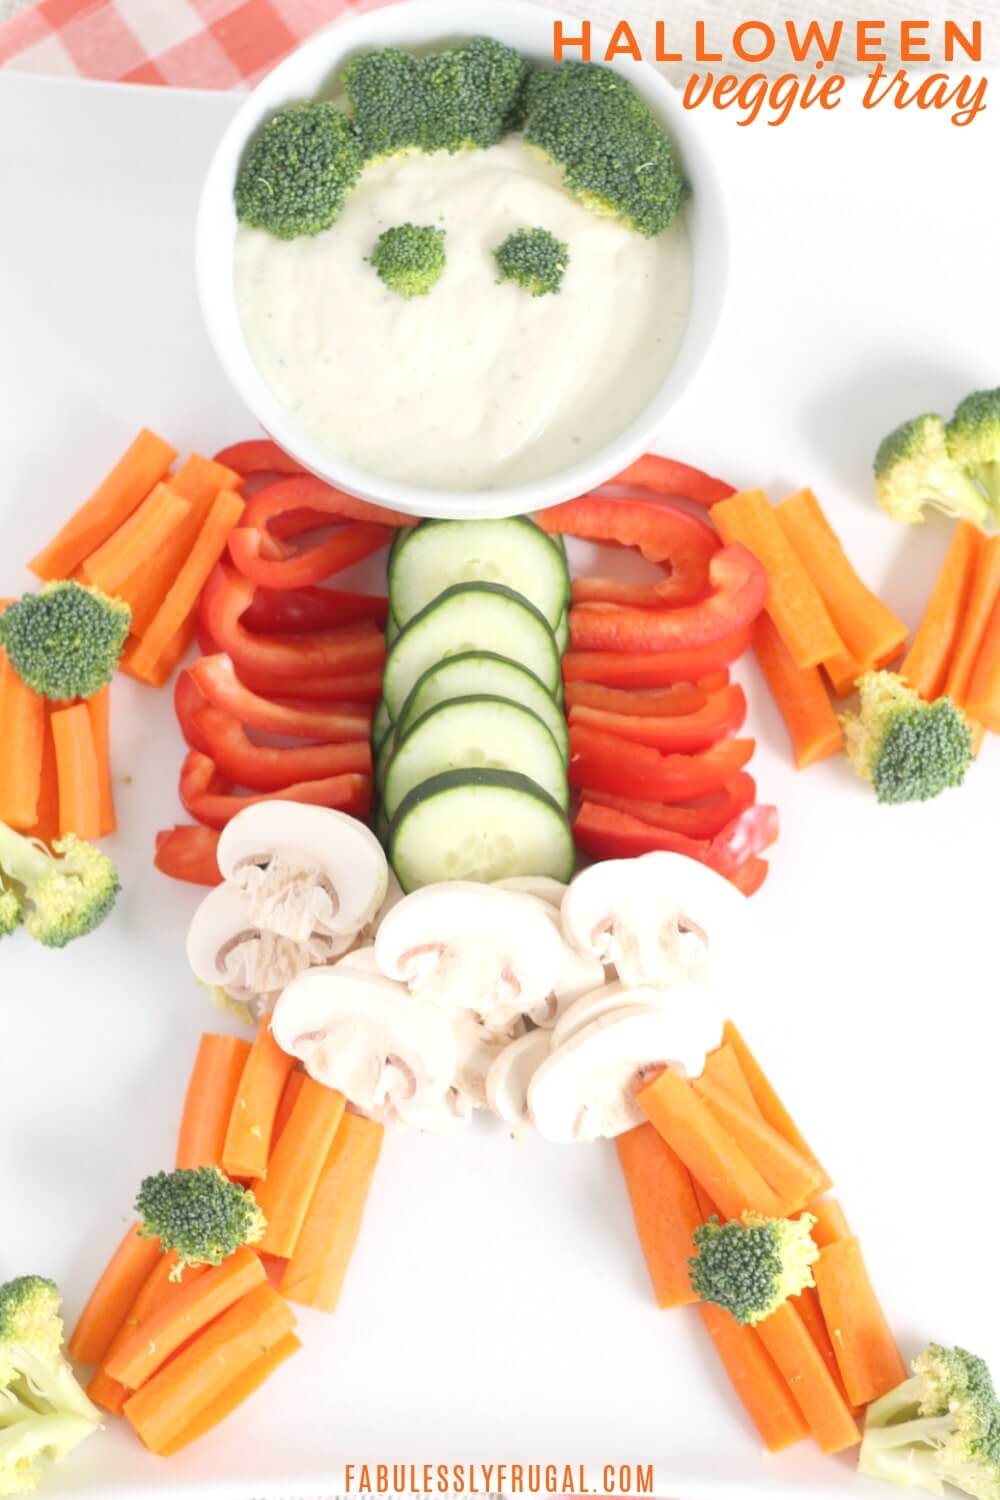 Creative Veggie Tray Food Decoration Idea In Skeleton Shape For Halloween Party